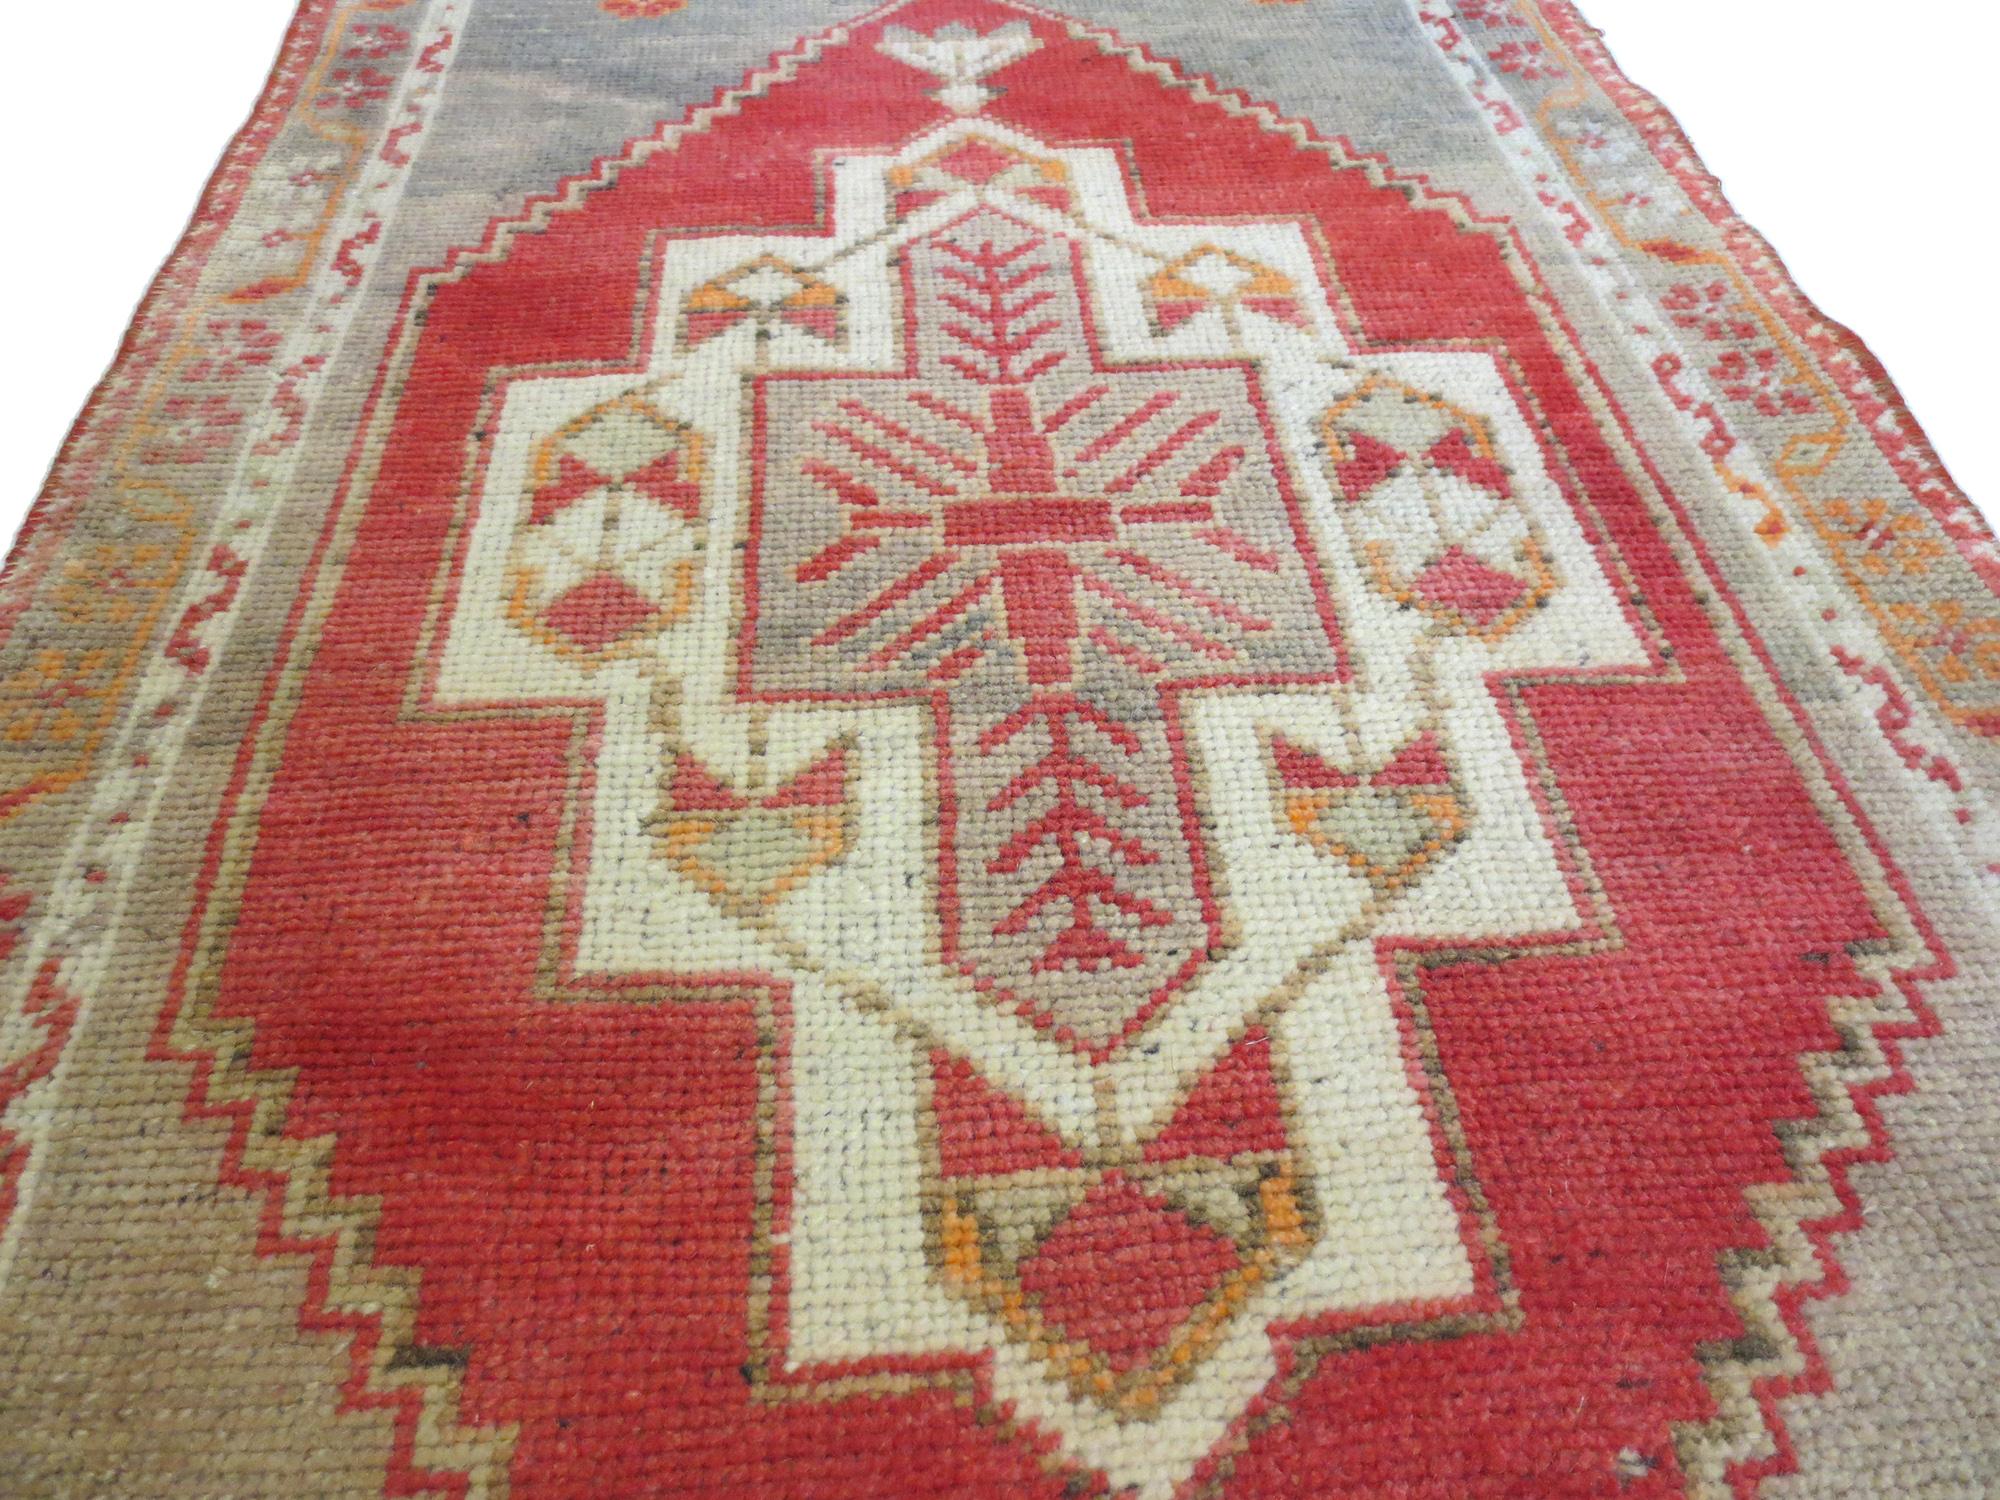 This is a vintage Swedish flat-woven runner from the mid-20th century.